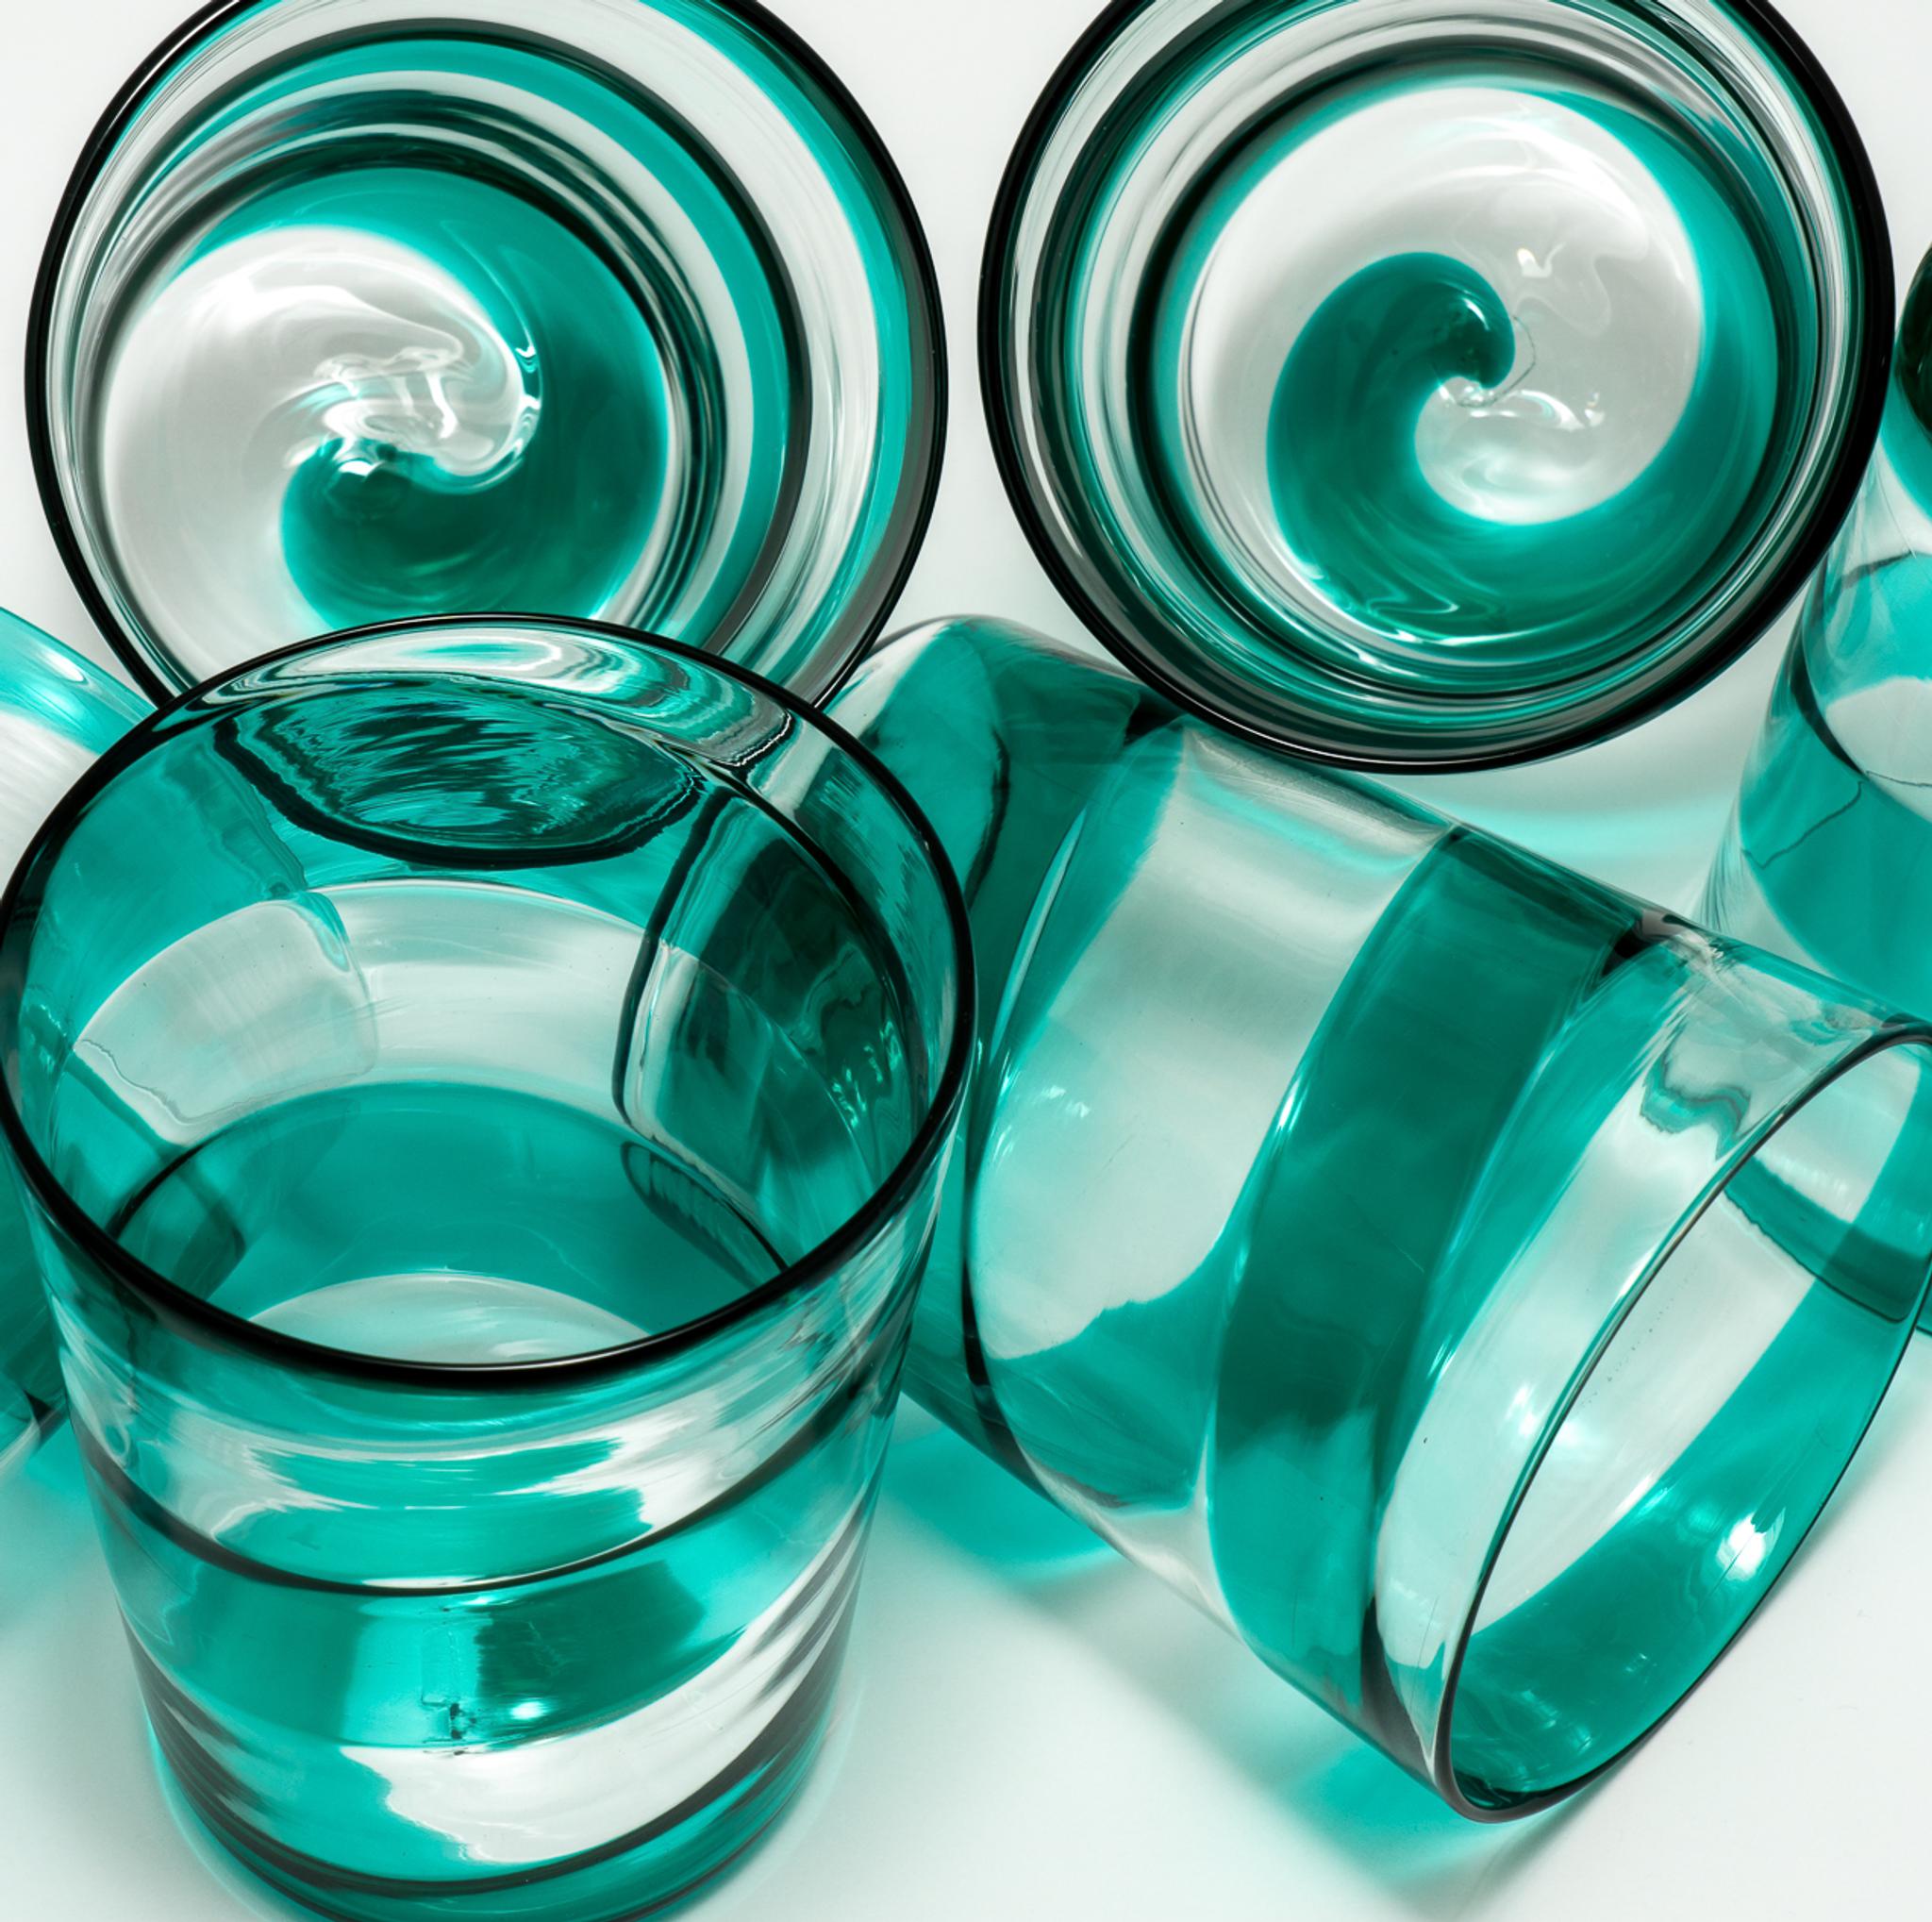 Sets of Drinking Glasses